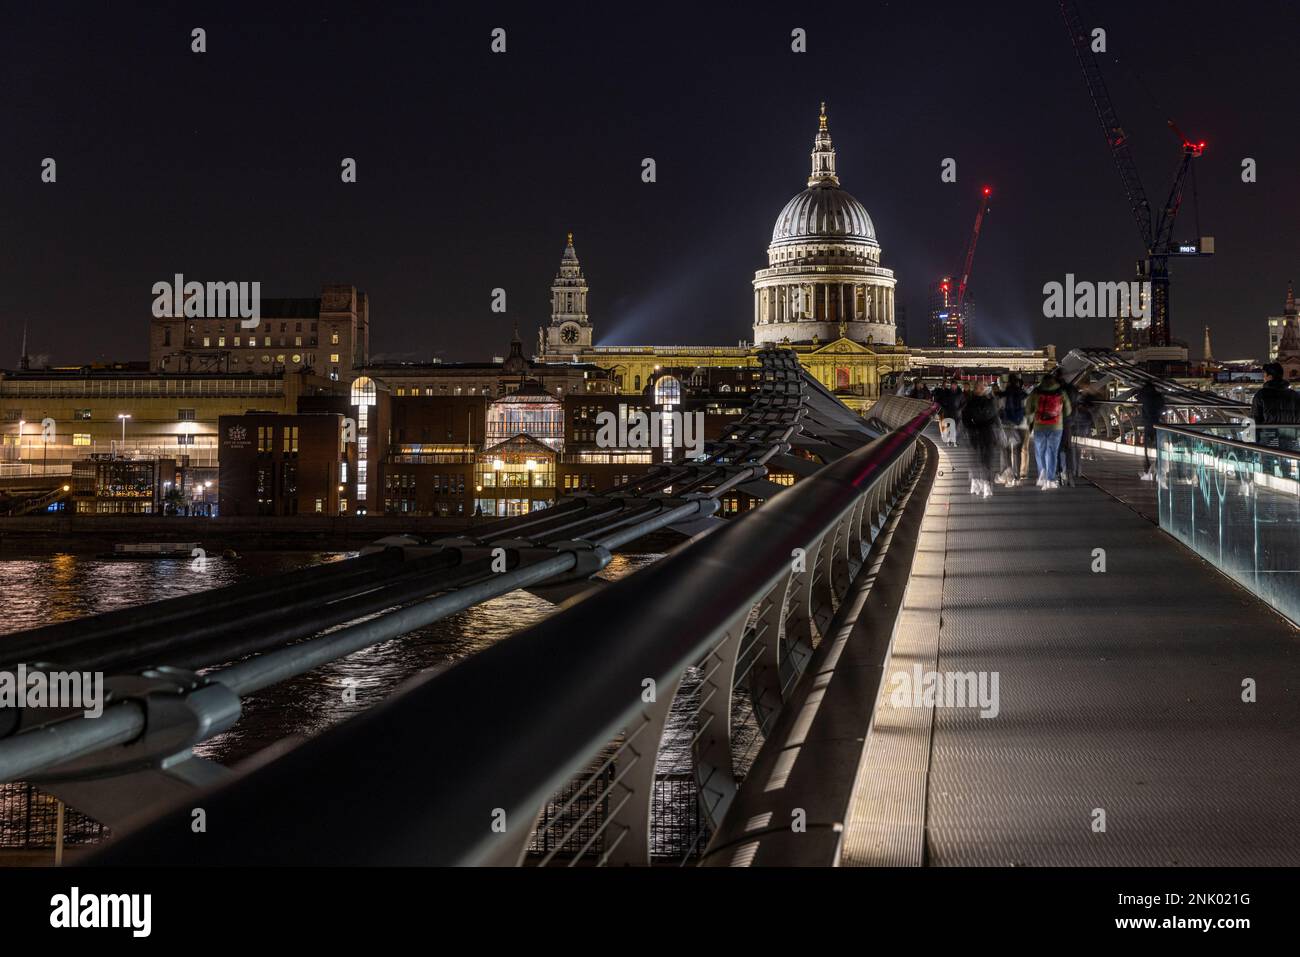 The Millennium Bridge, St Paul's Cathedral, the City, River Thames at night, London, England, UK Stock Photo